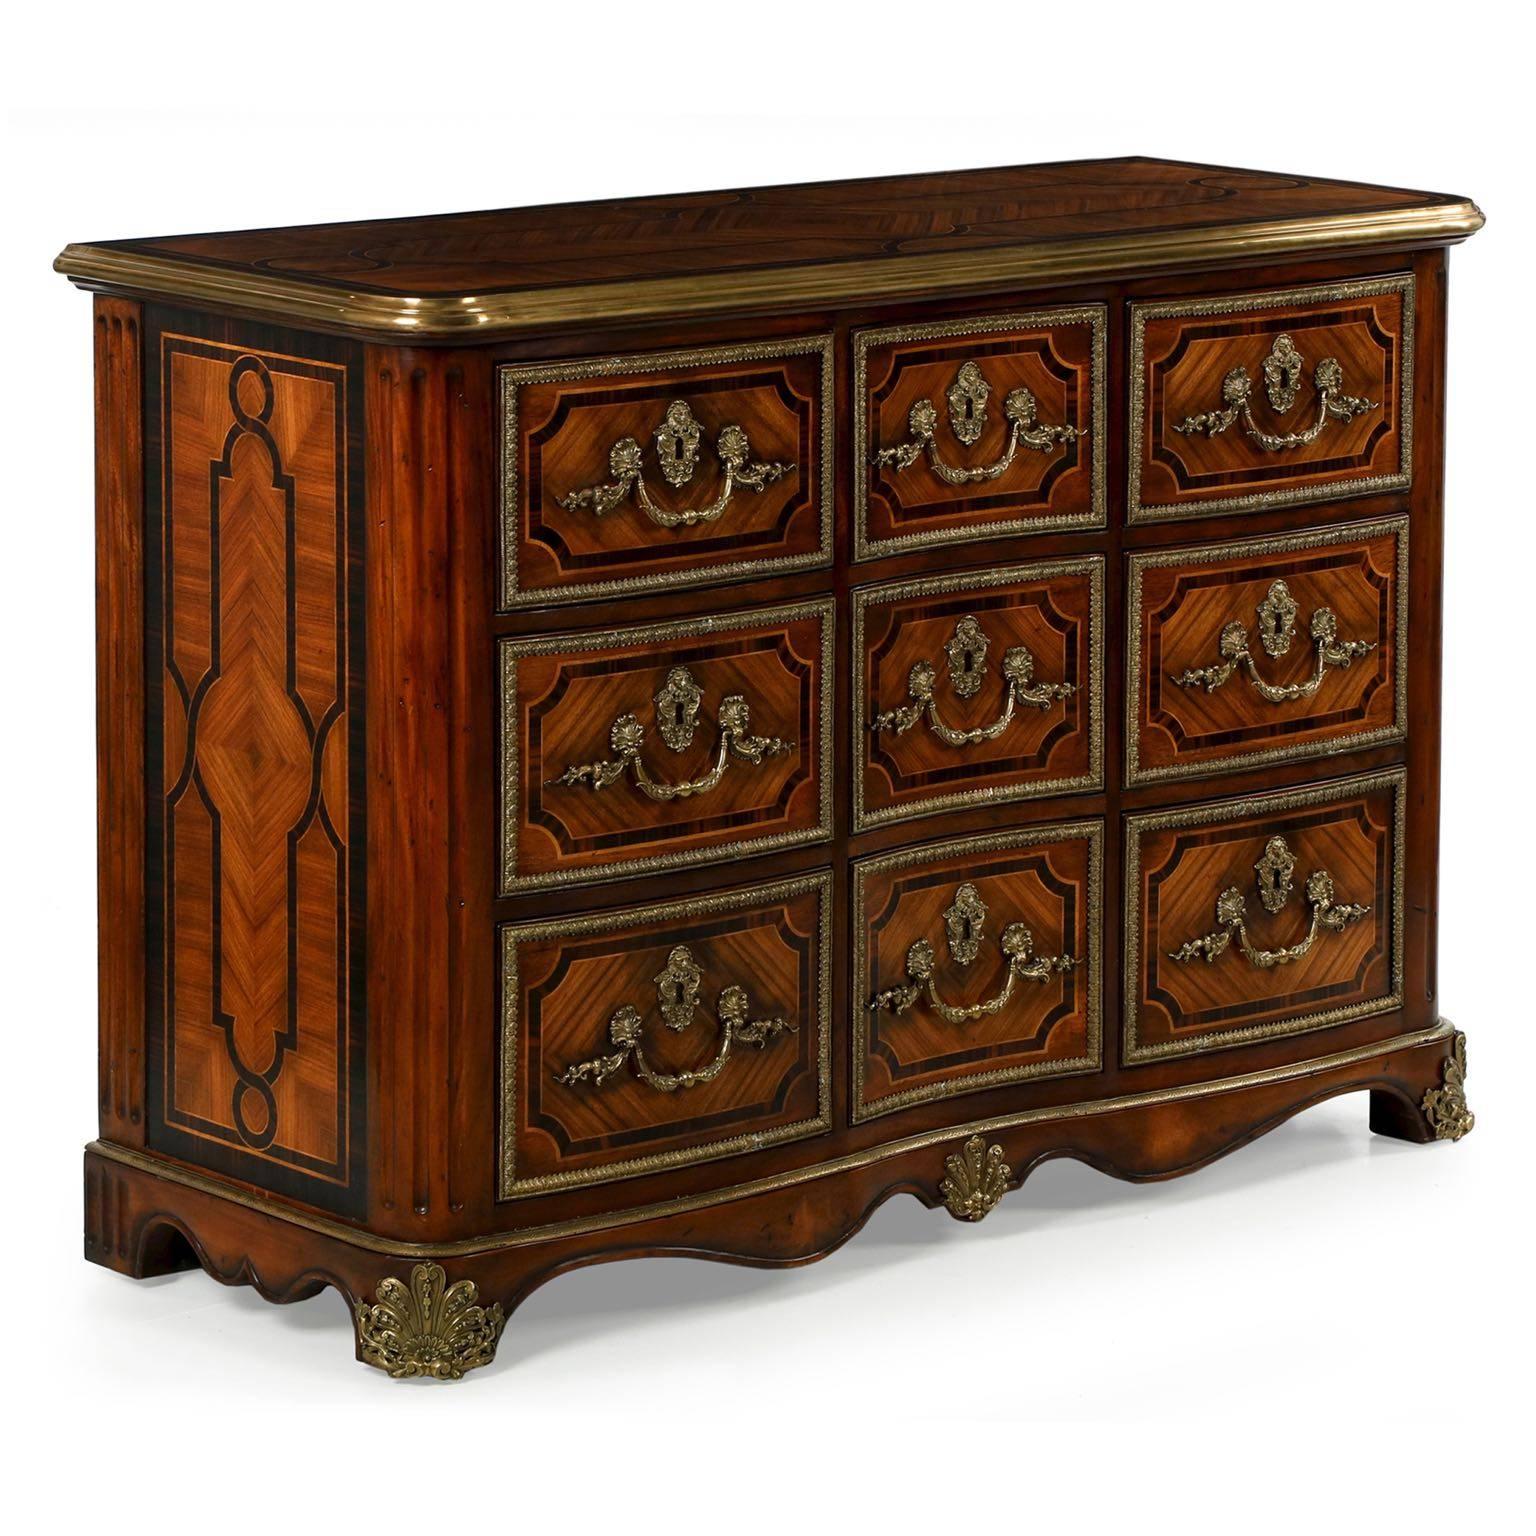 This very fine reproduction after the original in Althorp was designed by Theodore Alexander in the Althorp Living Home collection and is called “the Commodious Chest”. An exquisitely crafted work, the marquetry throughout is of the highest quality,